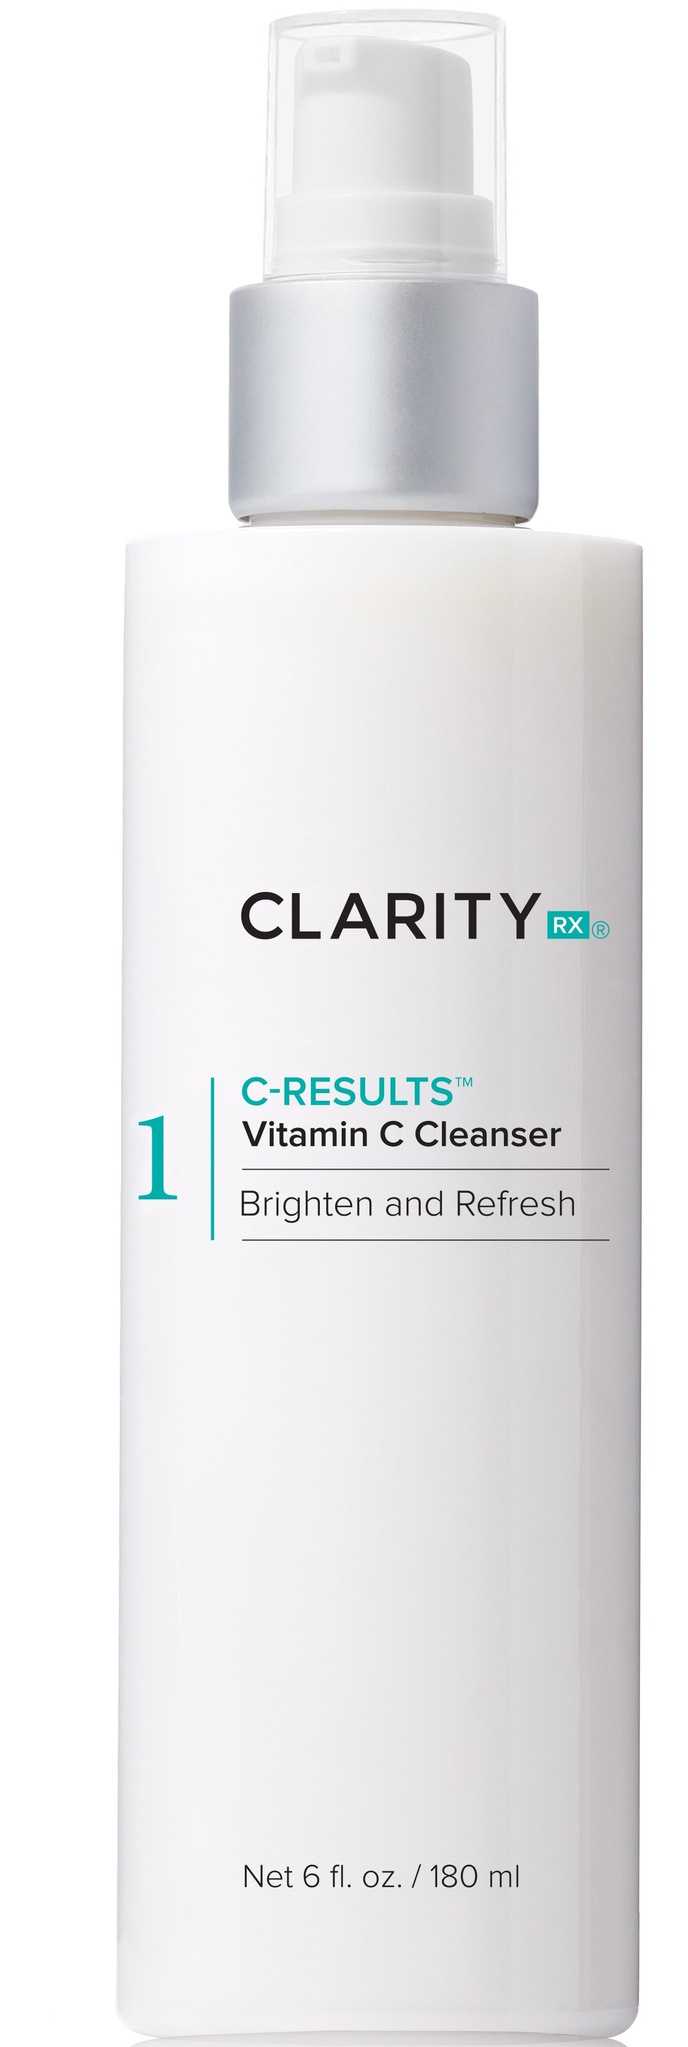 Clarity Rx C-results Vitamin C Cleanser